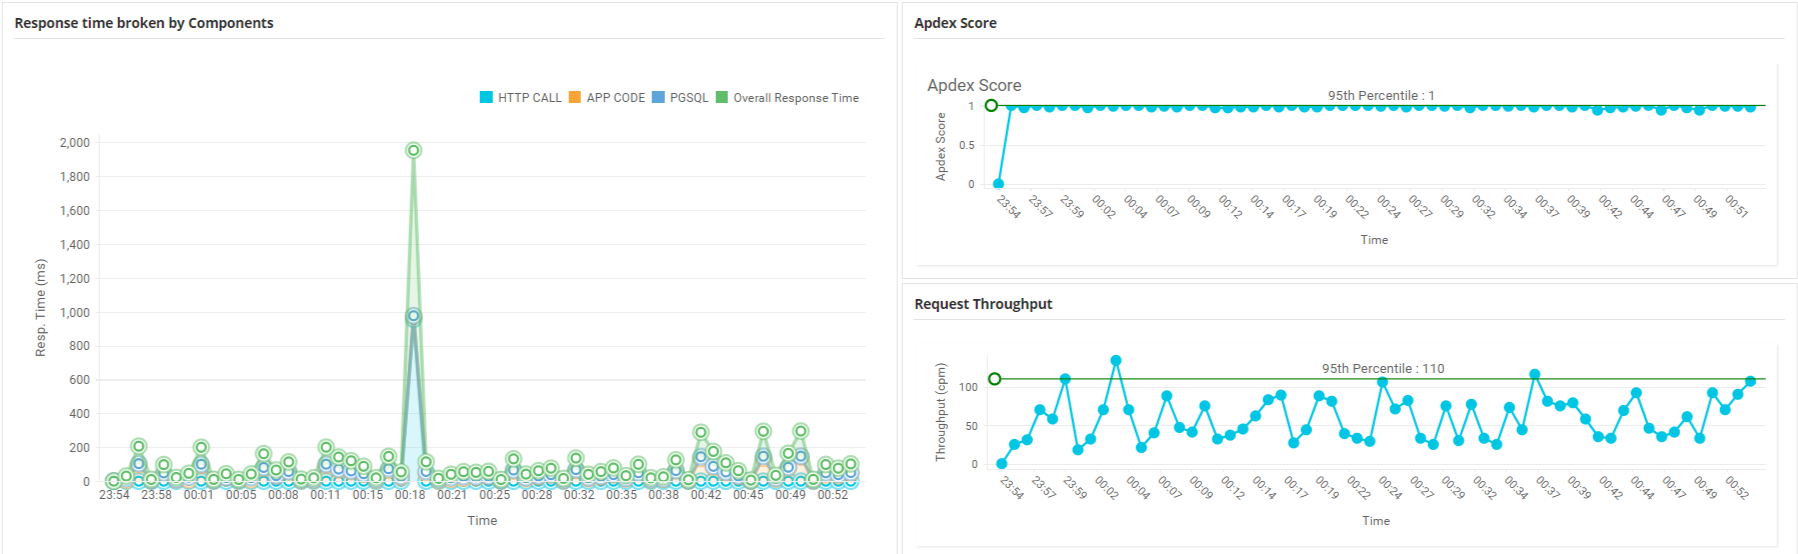 ManageEngine Applications Manager showing the application performance metrics tracked using DevOps monitoring